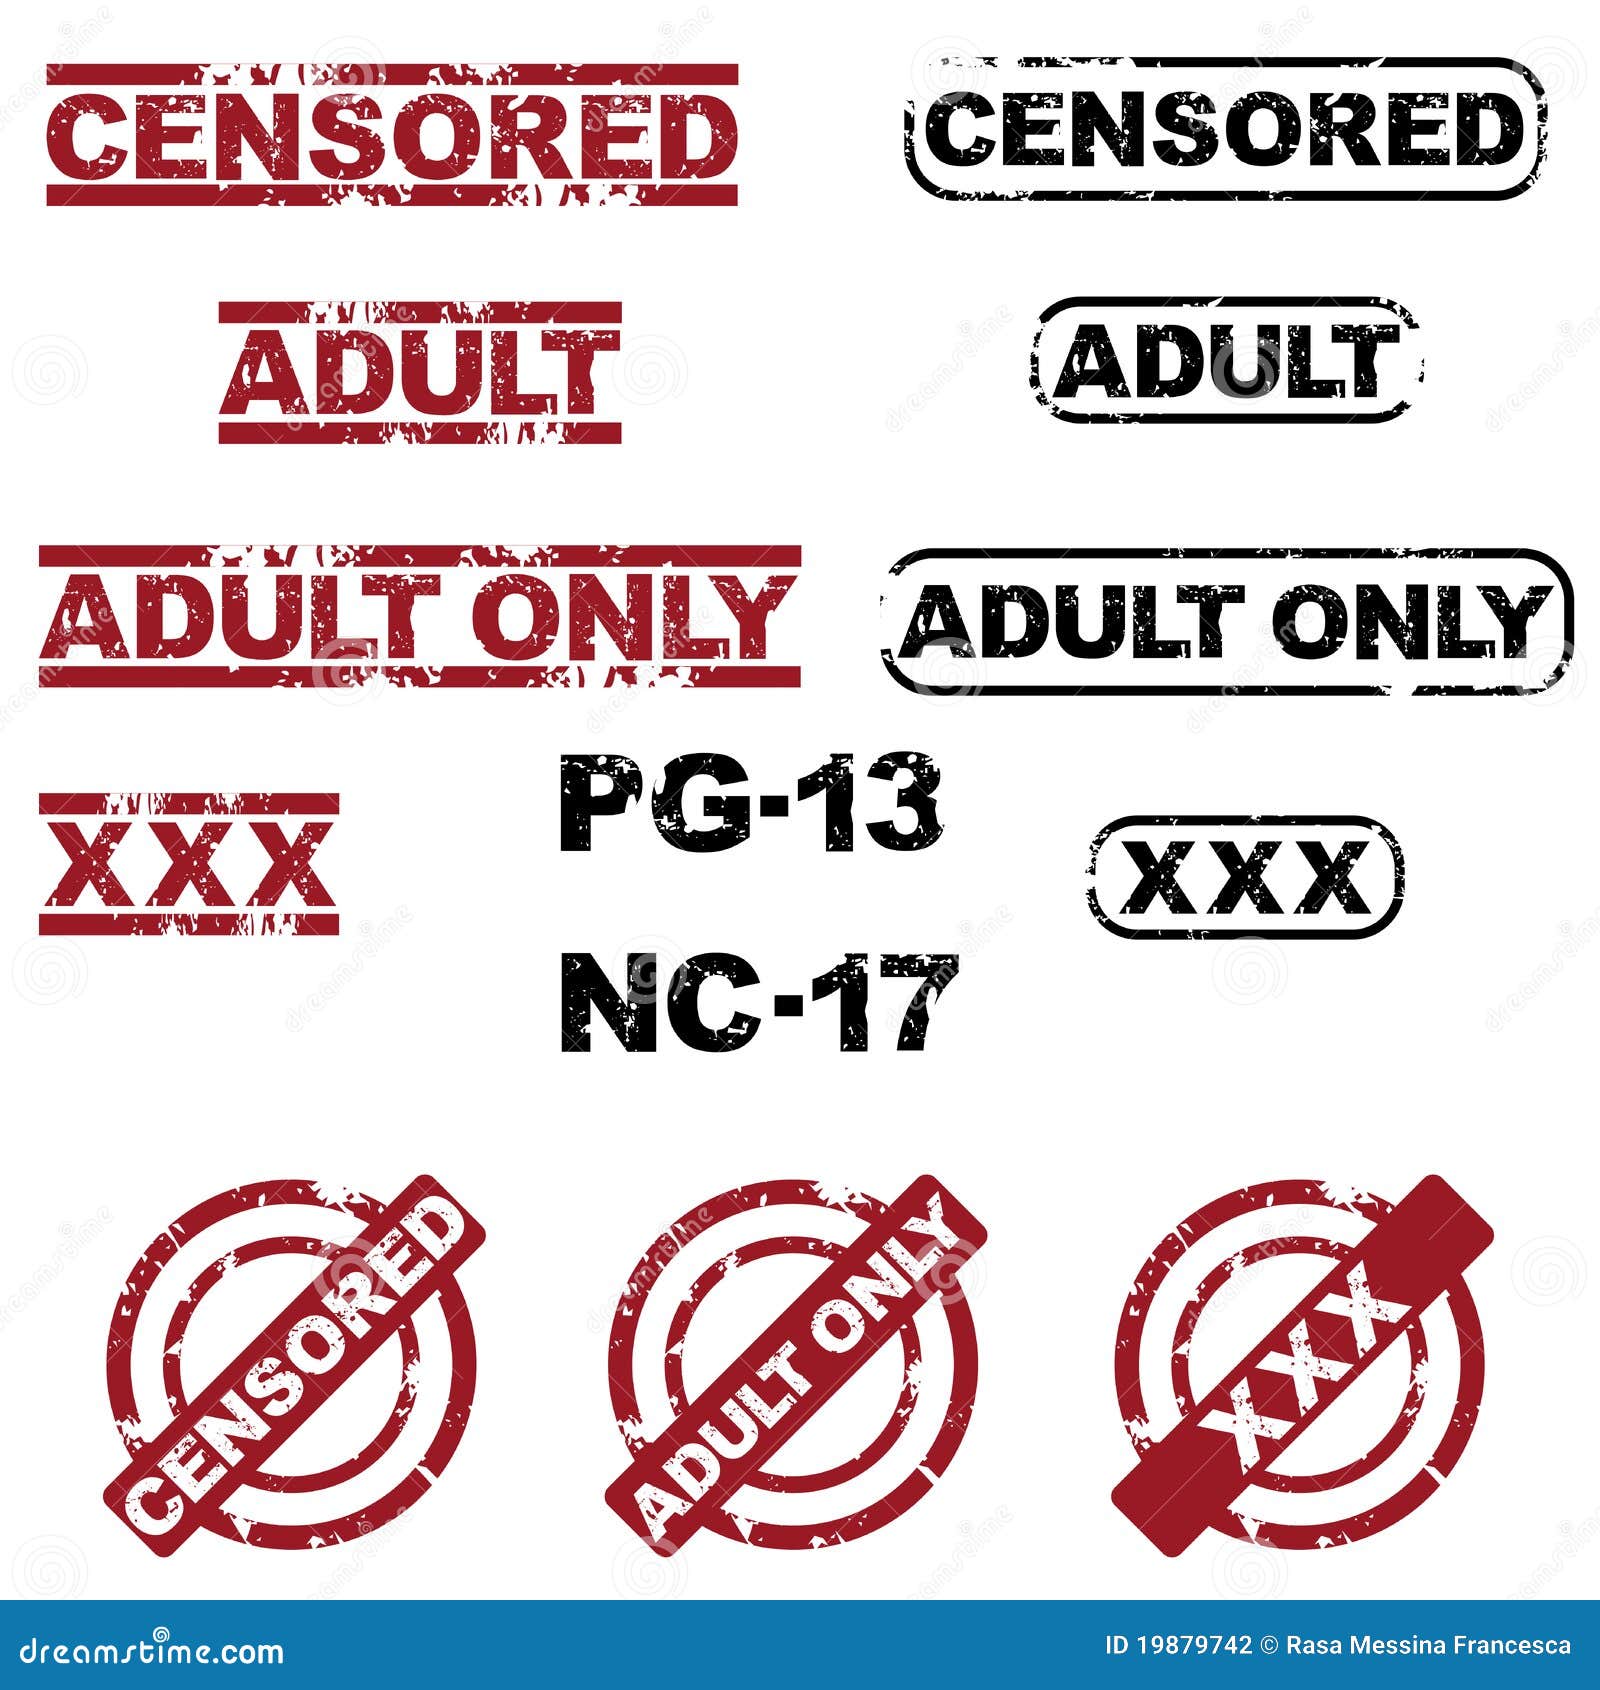 censored stamps